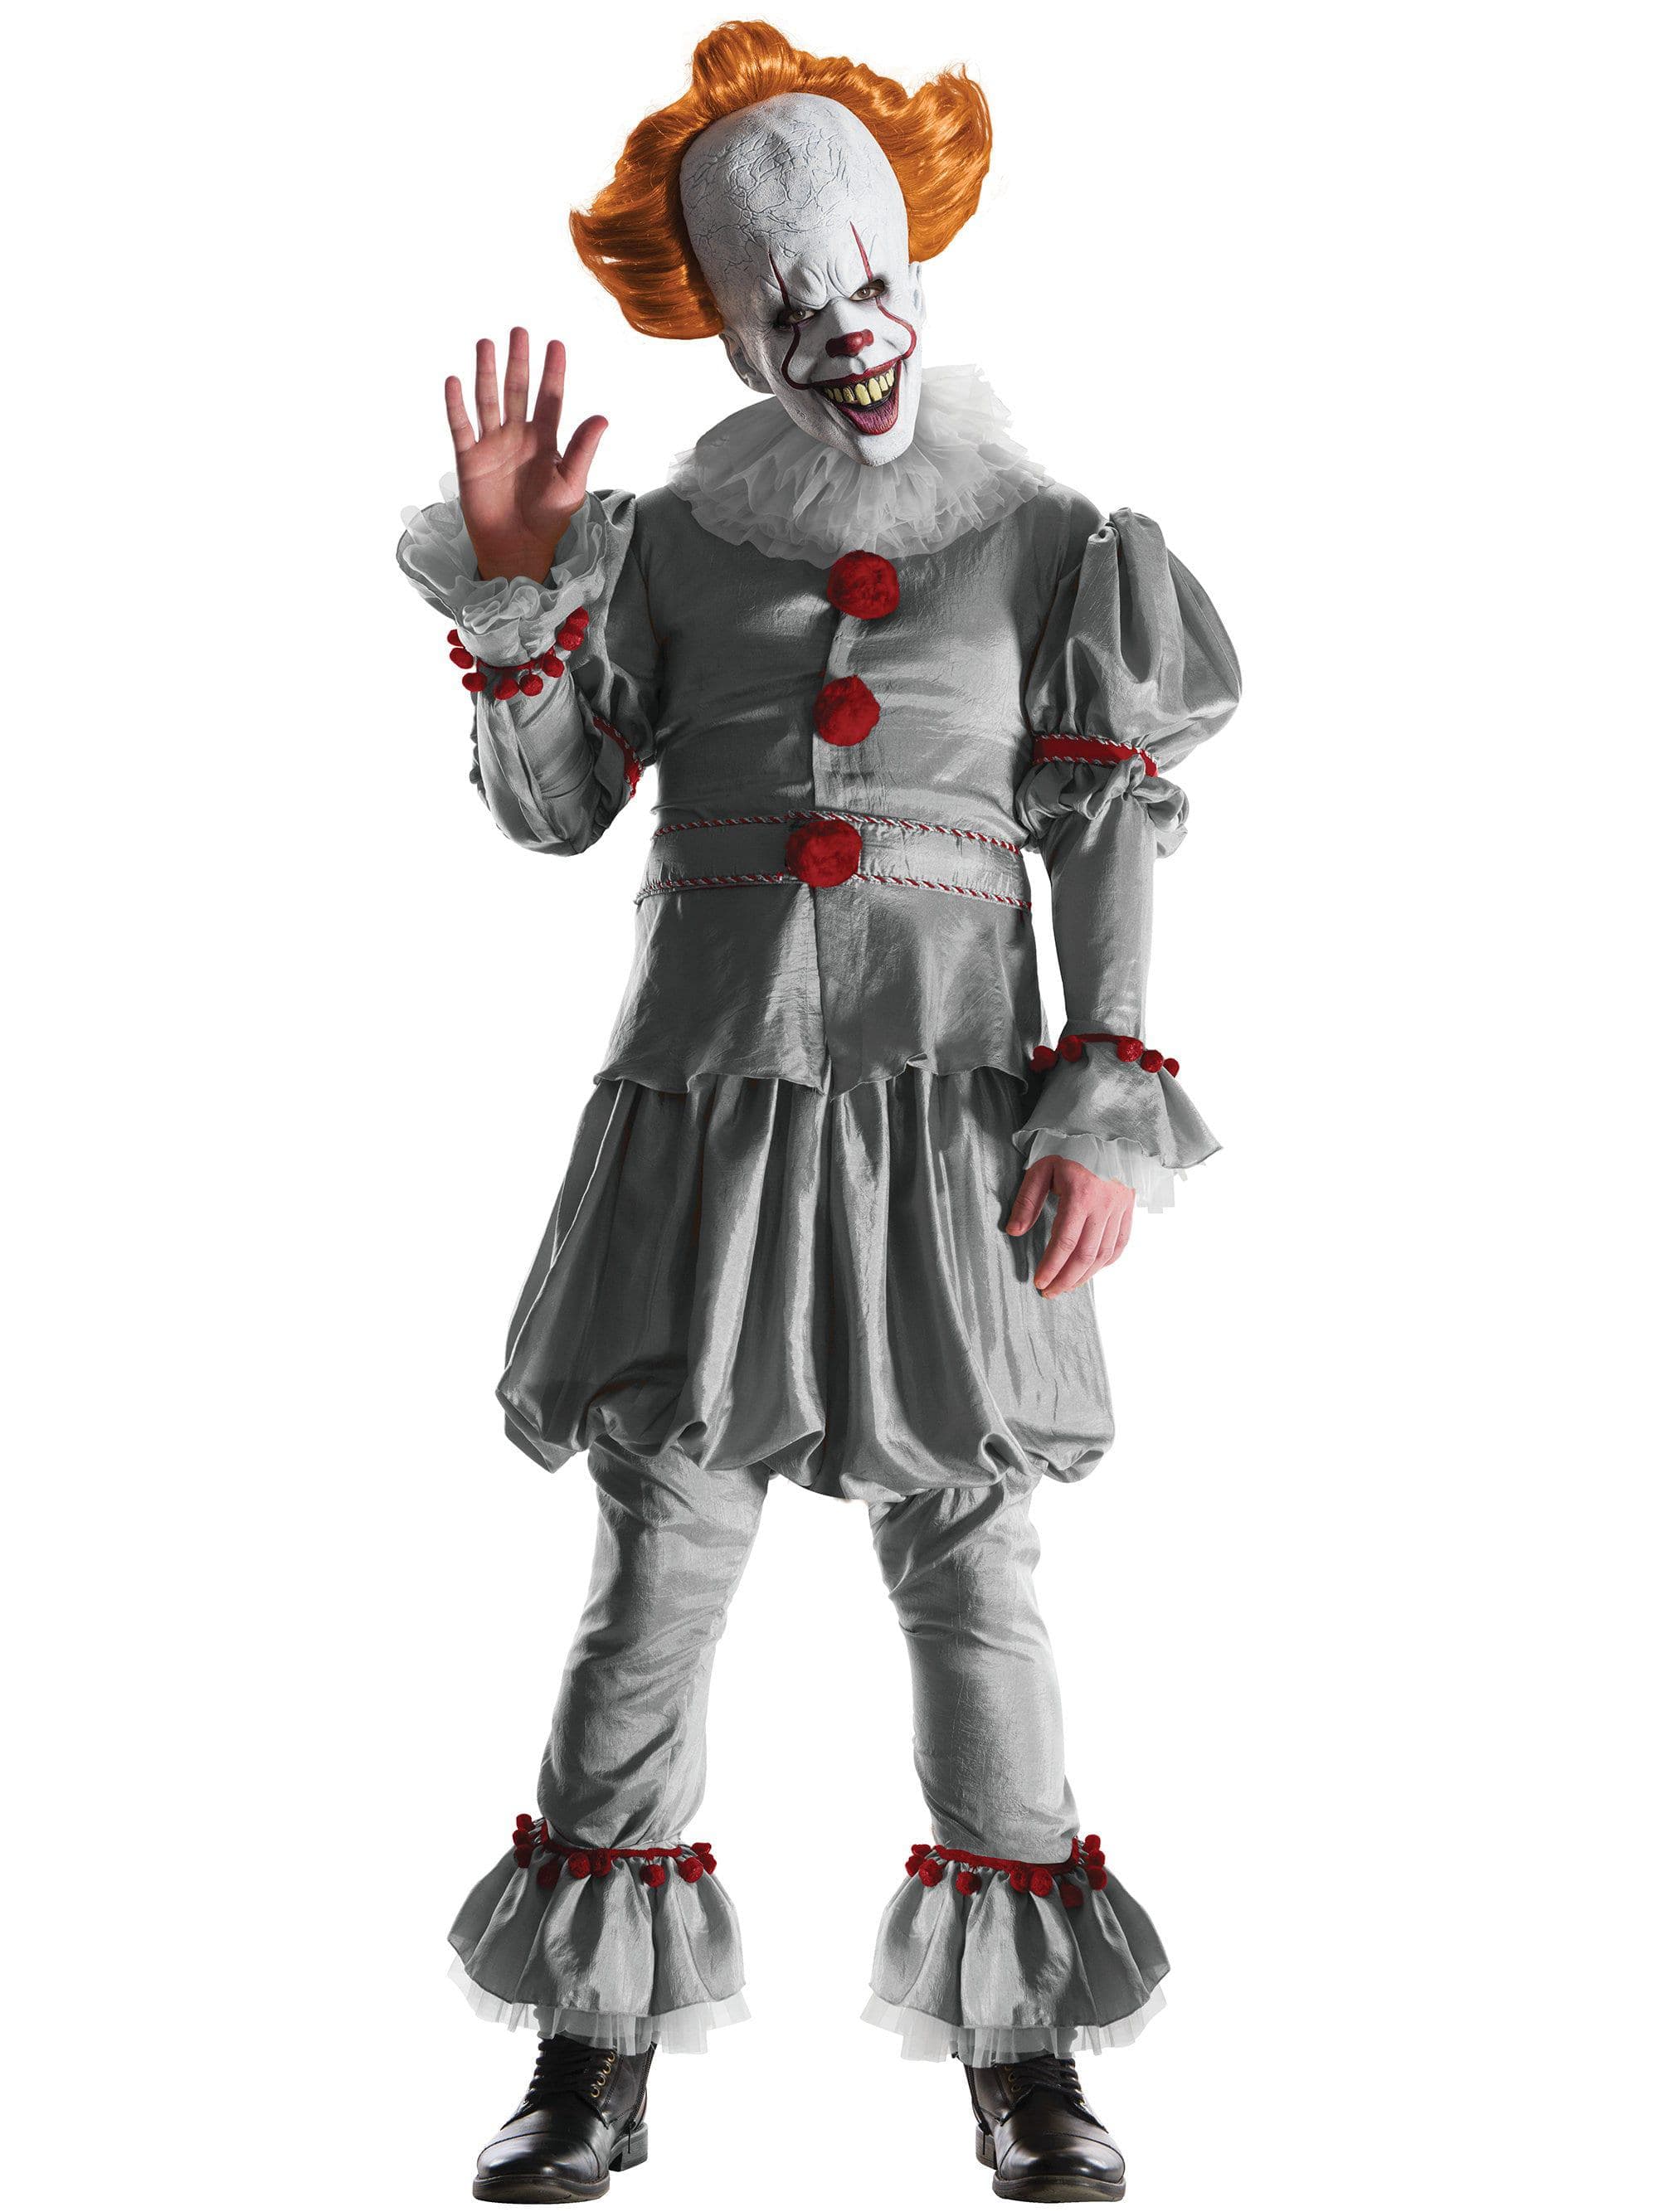 Adult It Pennywise Costume - costumes.com